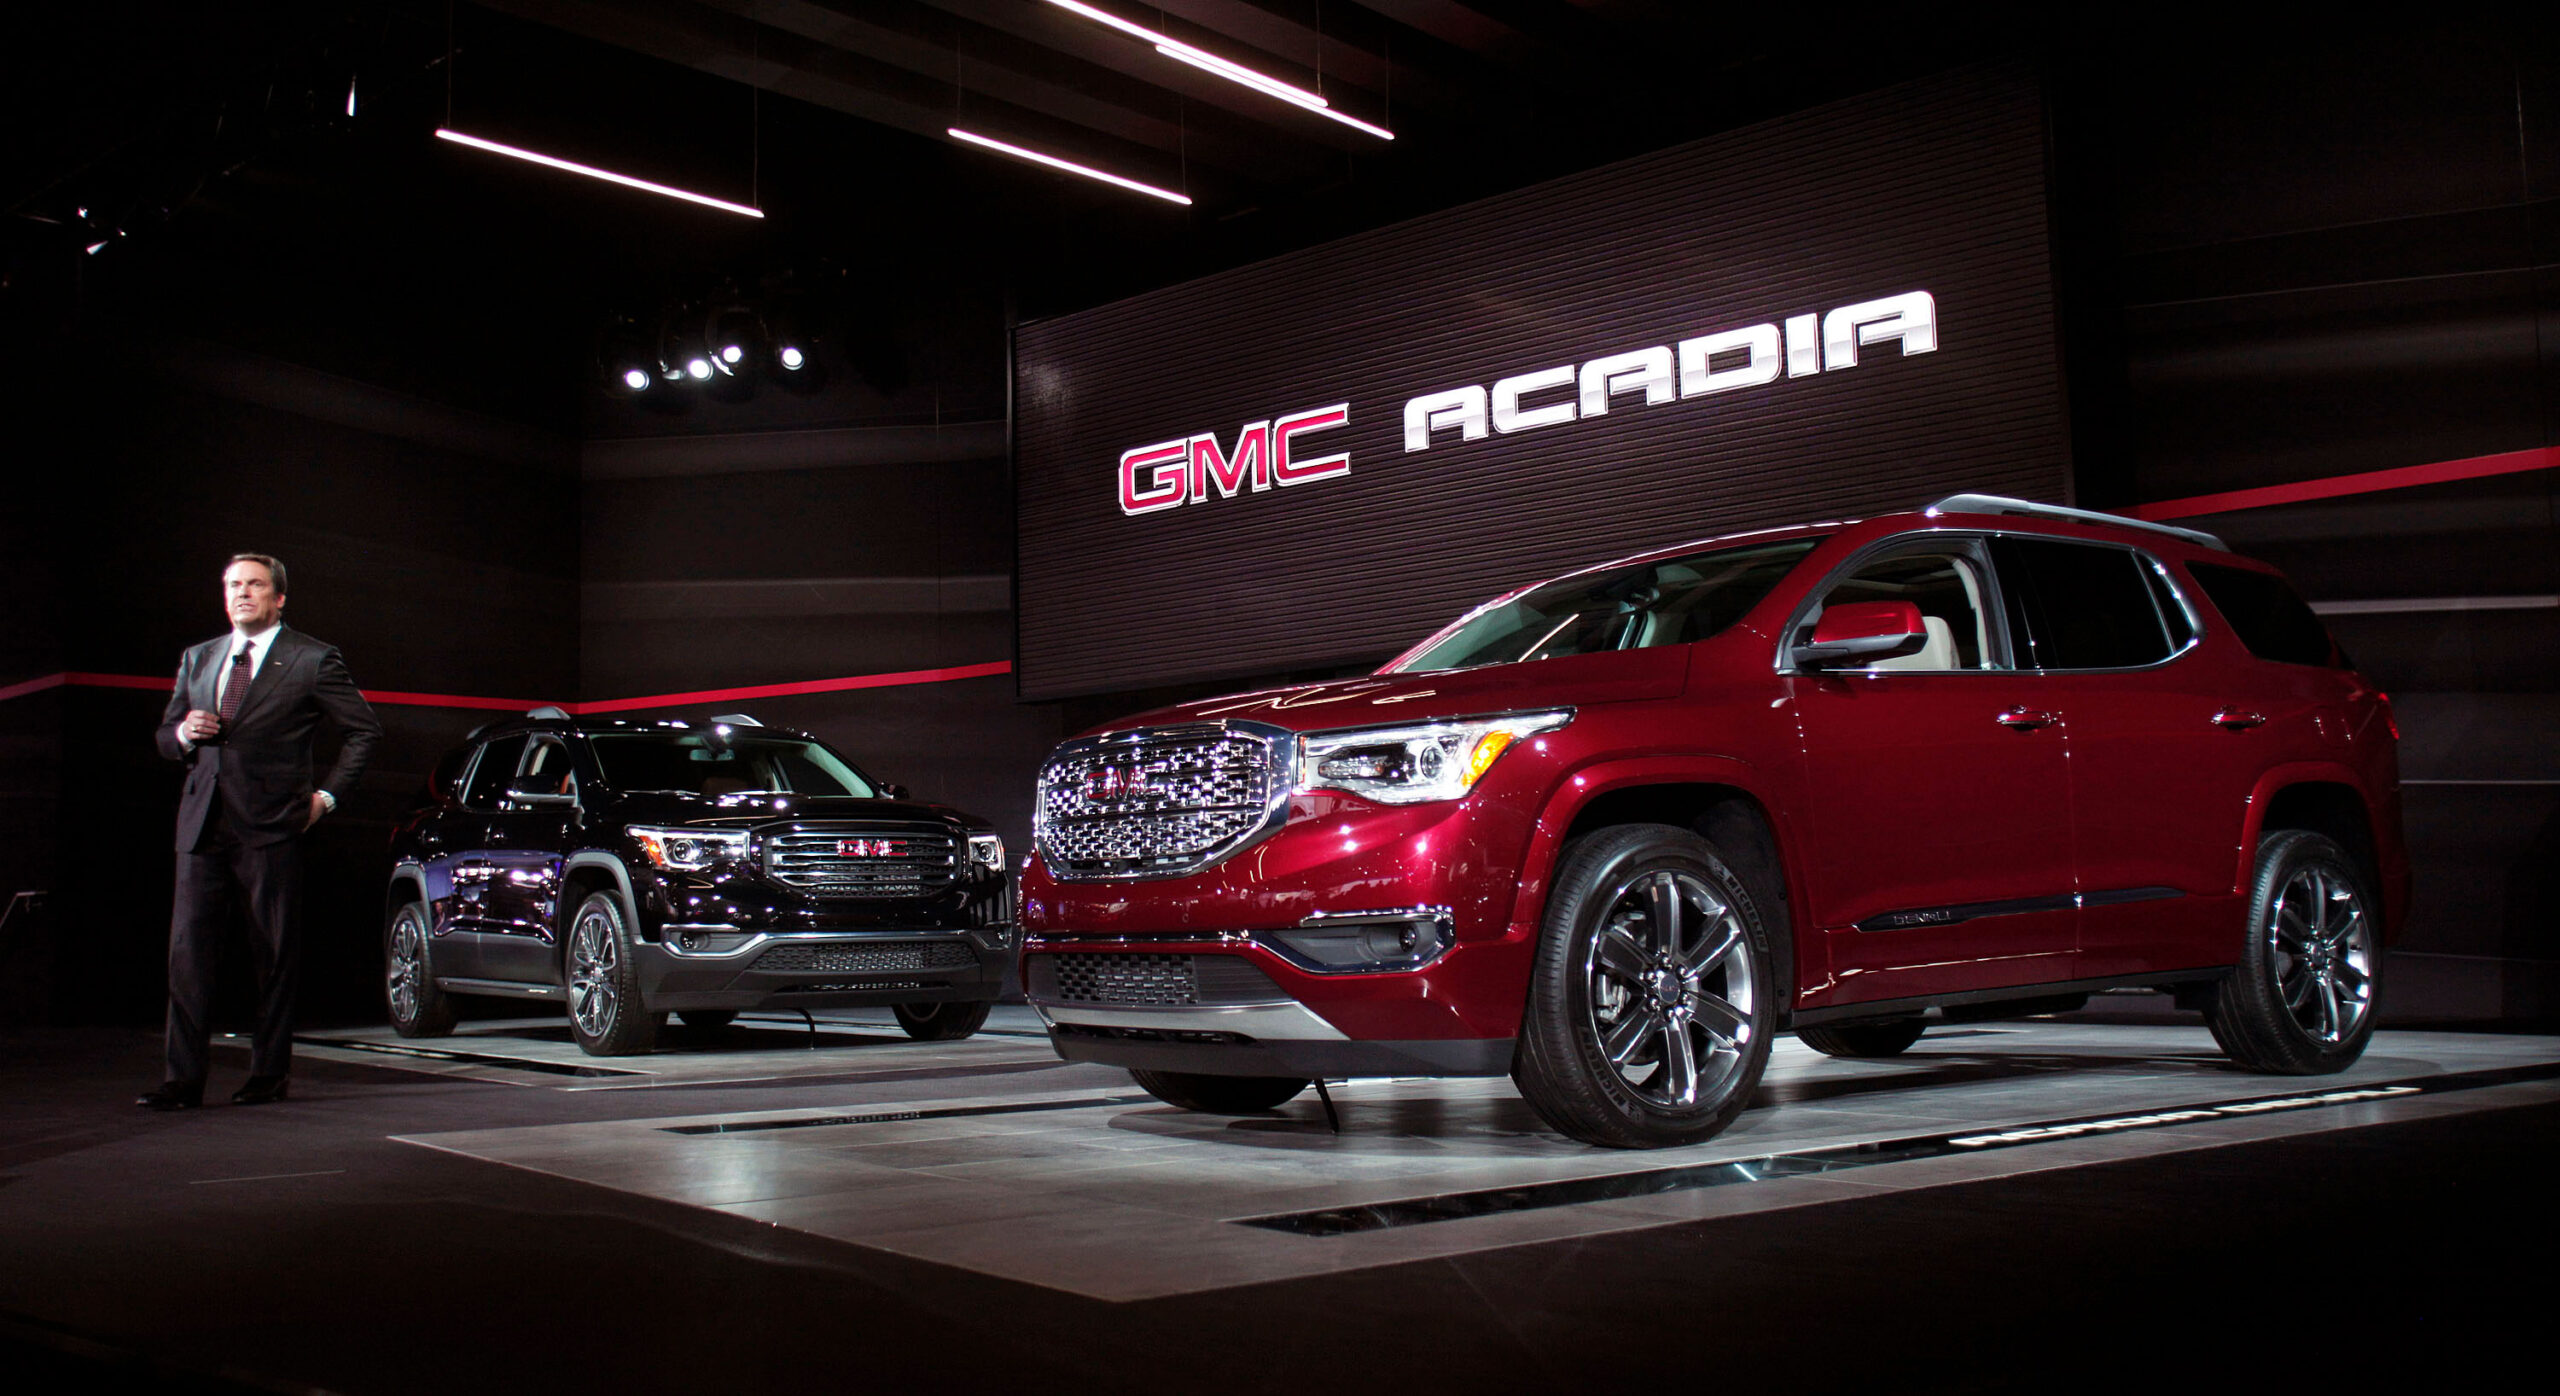 2017 GMC Acadia crossover SUVs are revealed at the 2016 North American International Auto Show in J...